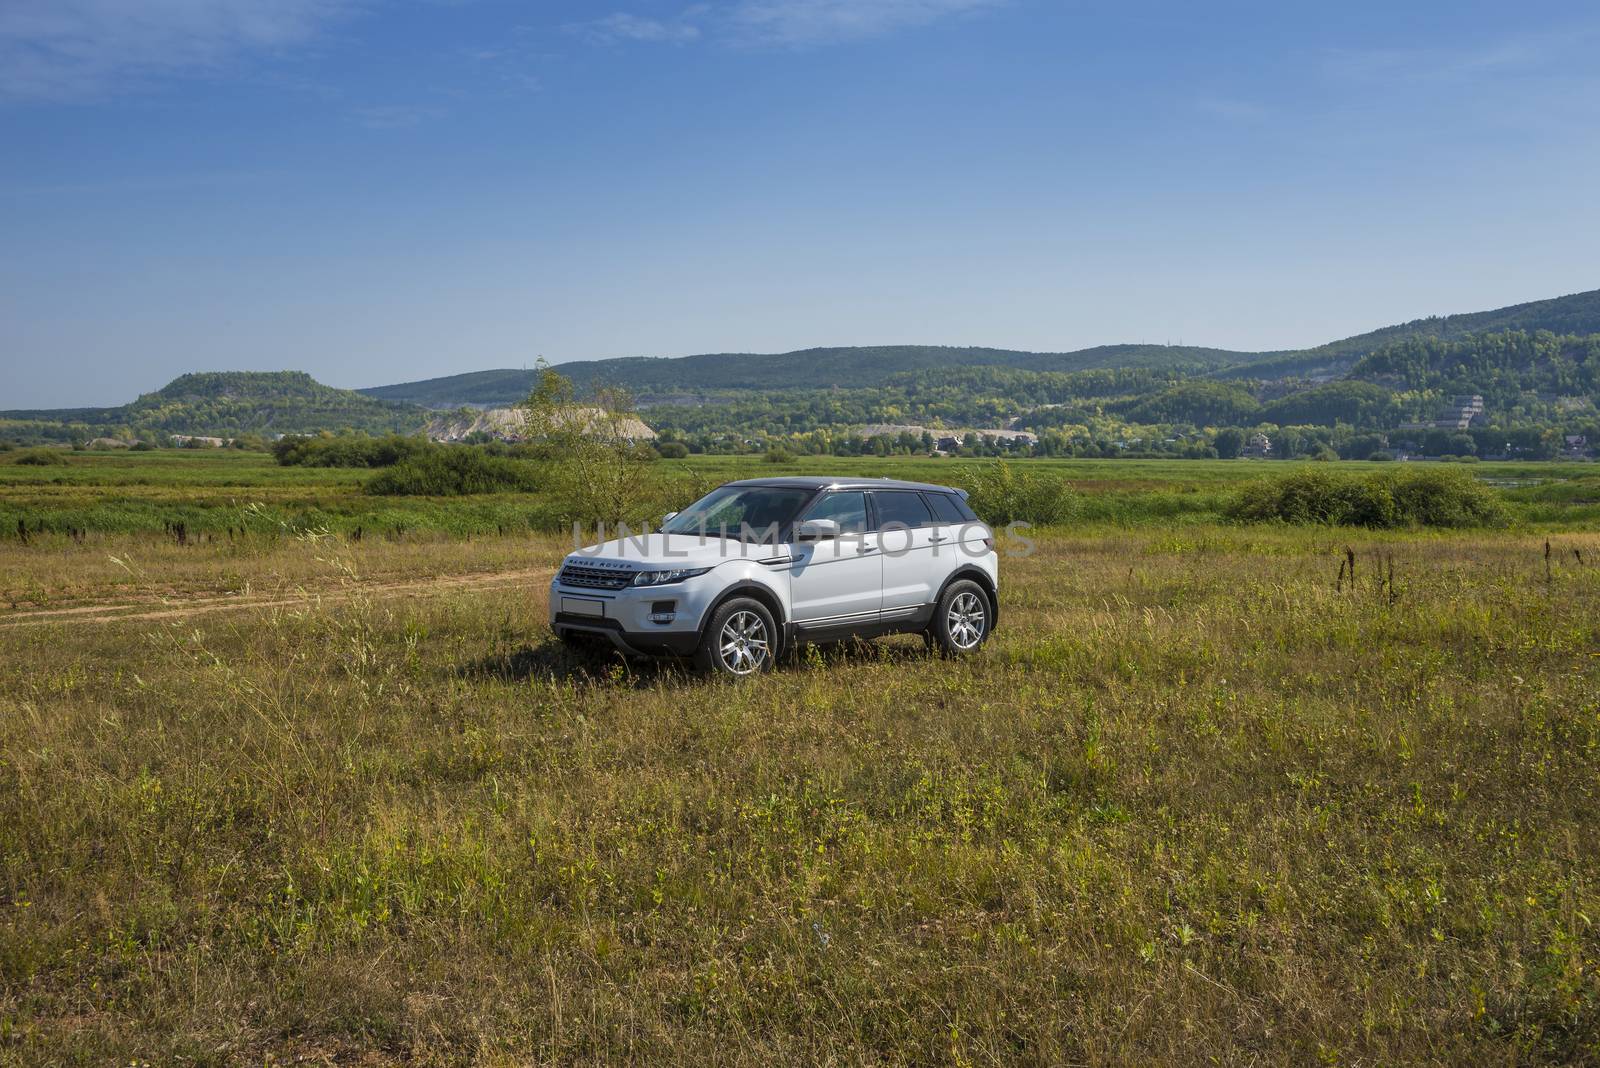 Car Land Rover Range Rover is in the field on a Sunny autumn day near the city of Samara, Russia. August 1, 2018 by butenkow